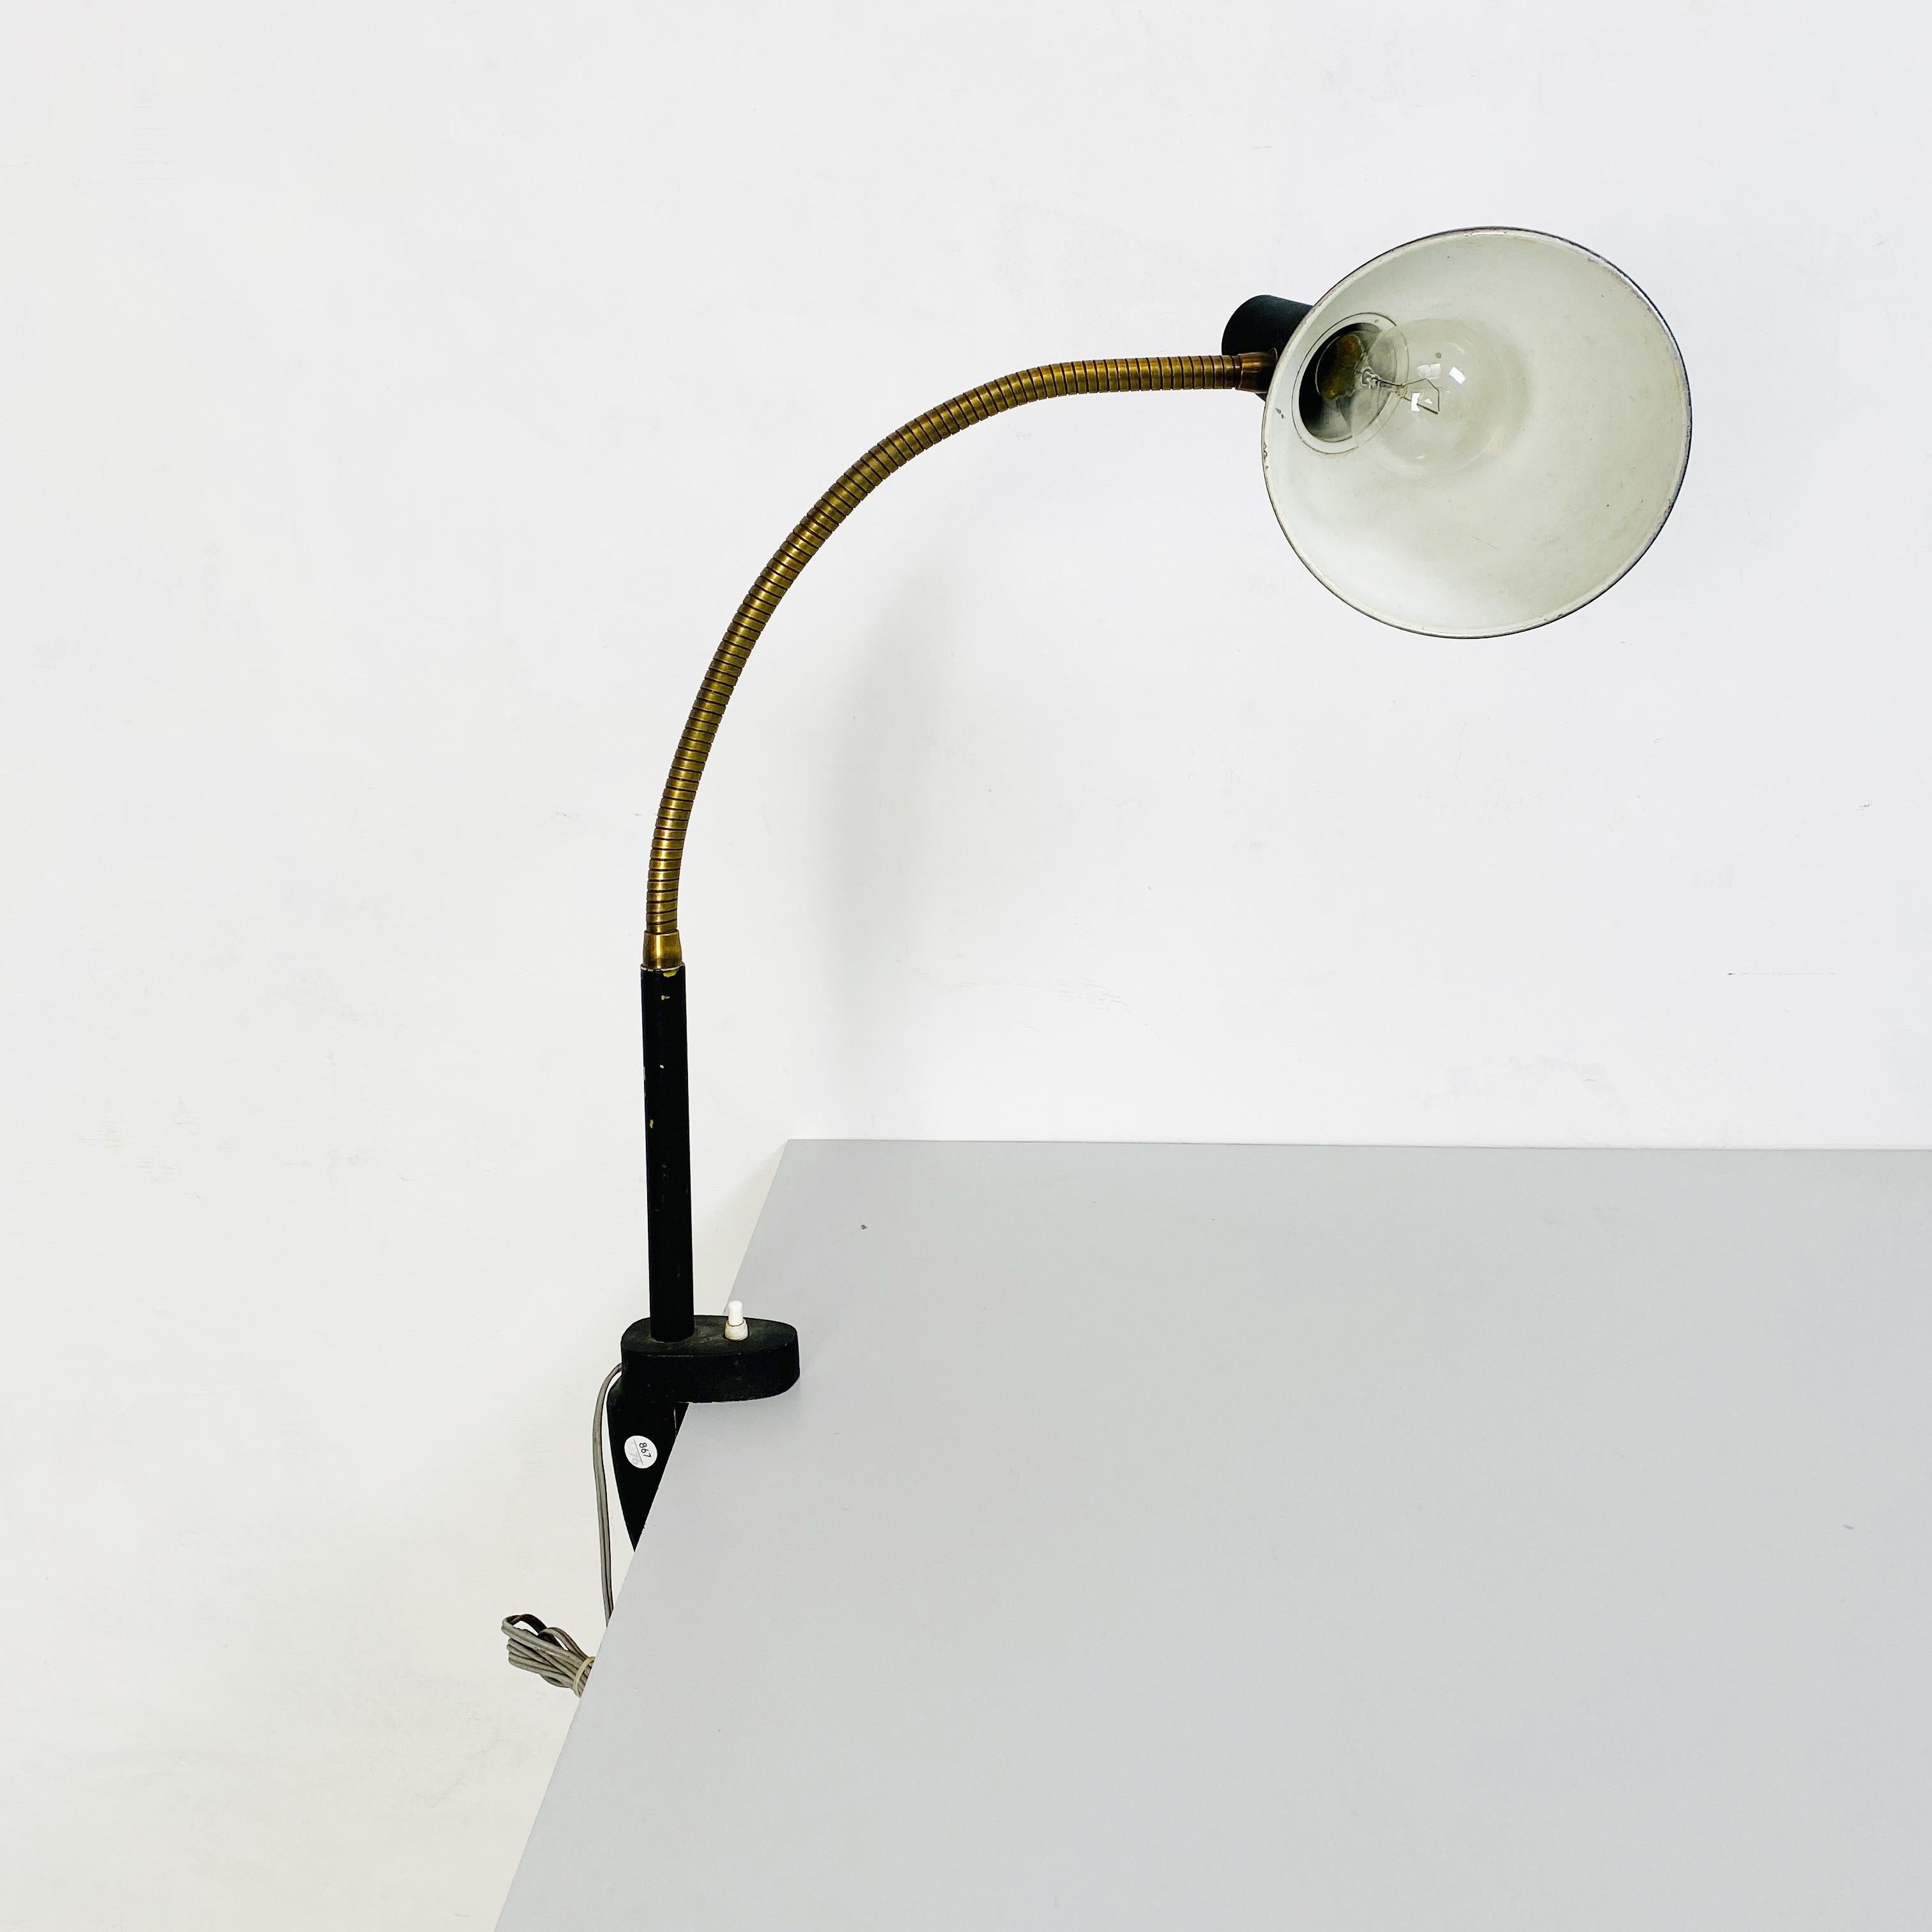 Italian Mid-Century Modern Articulated Table Lamp with Clamp-on, 1970s For Sale 1